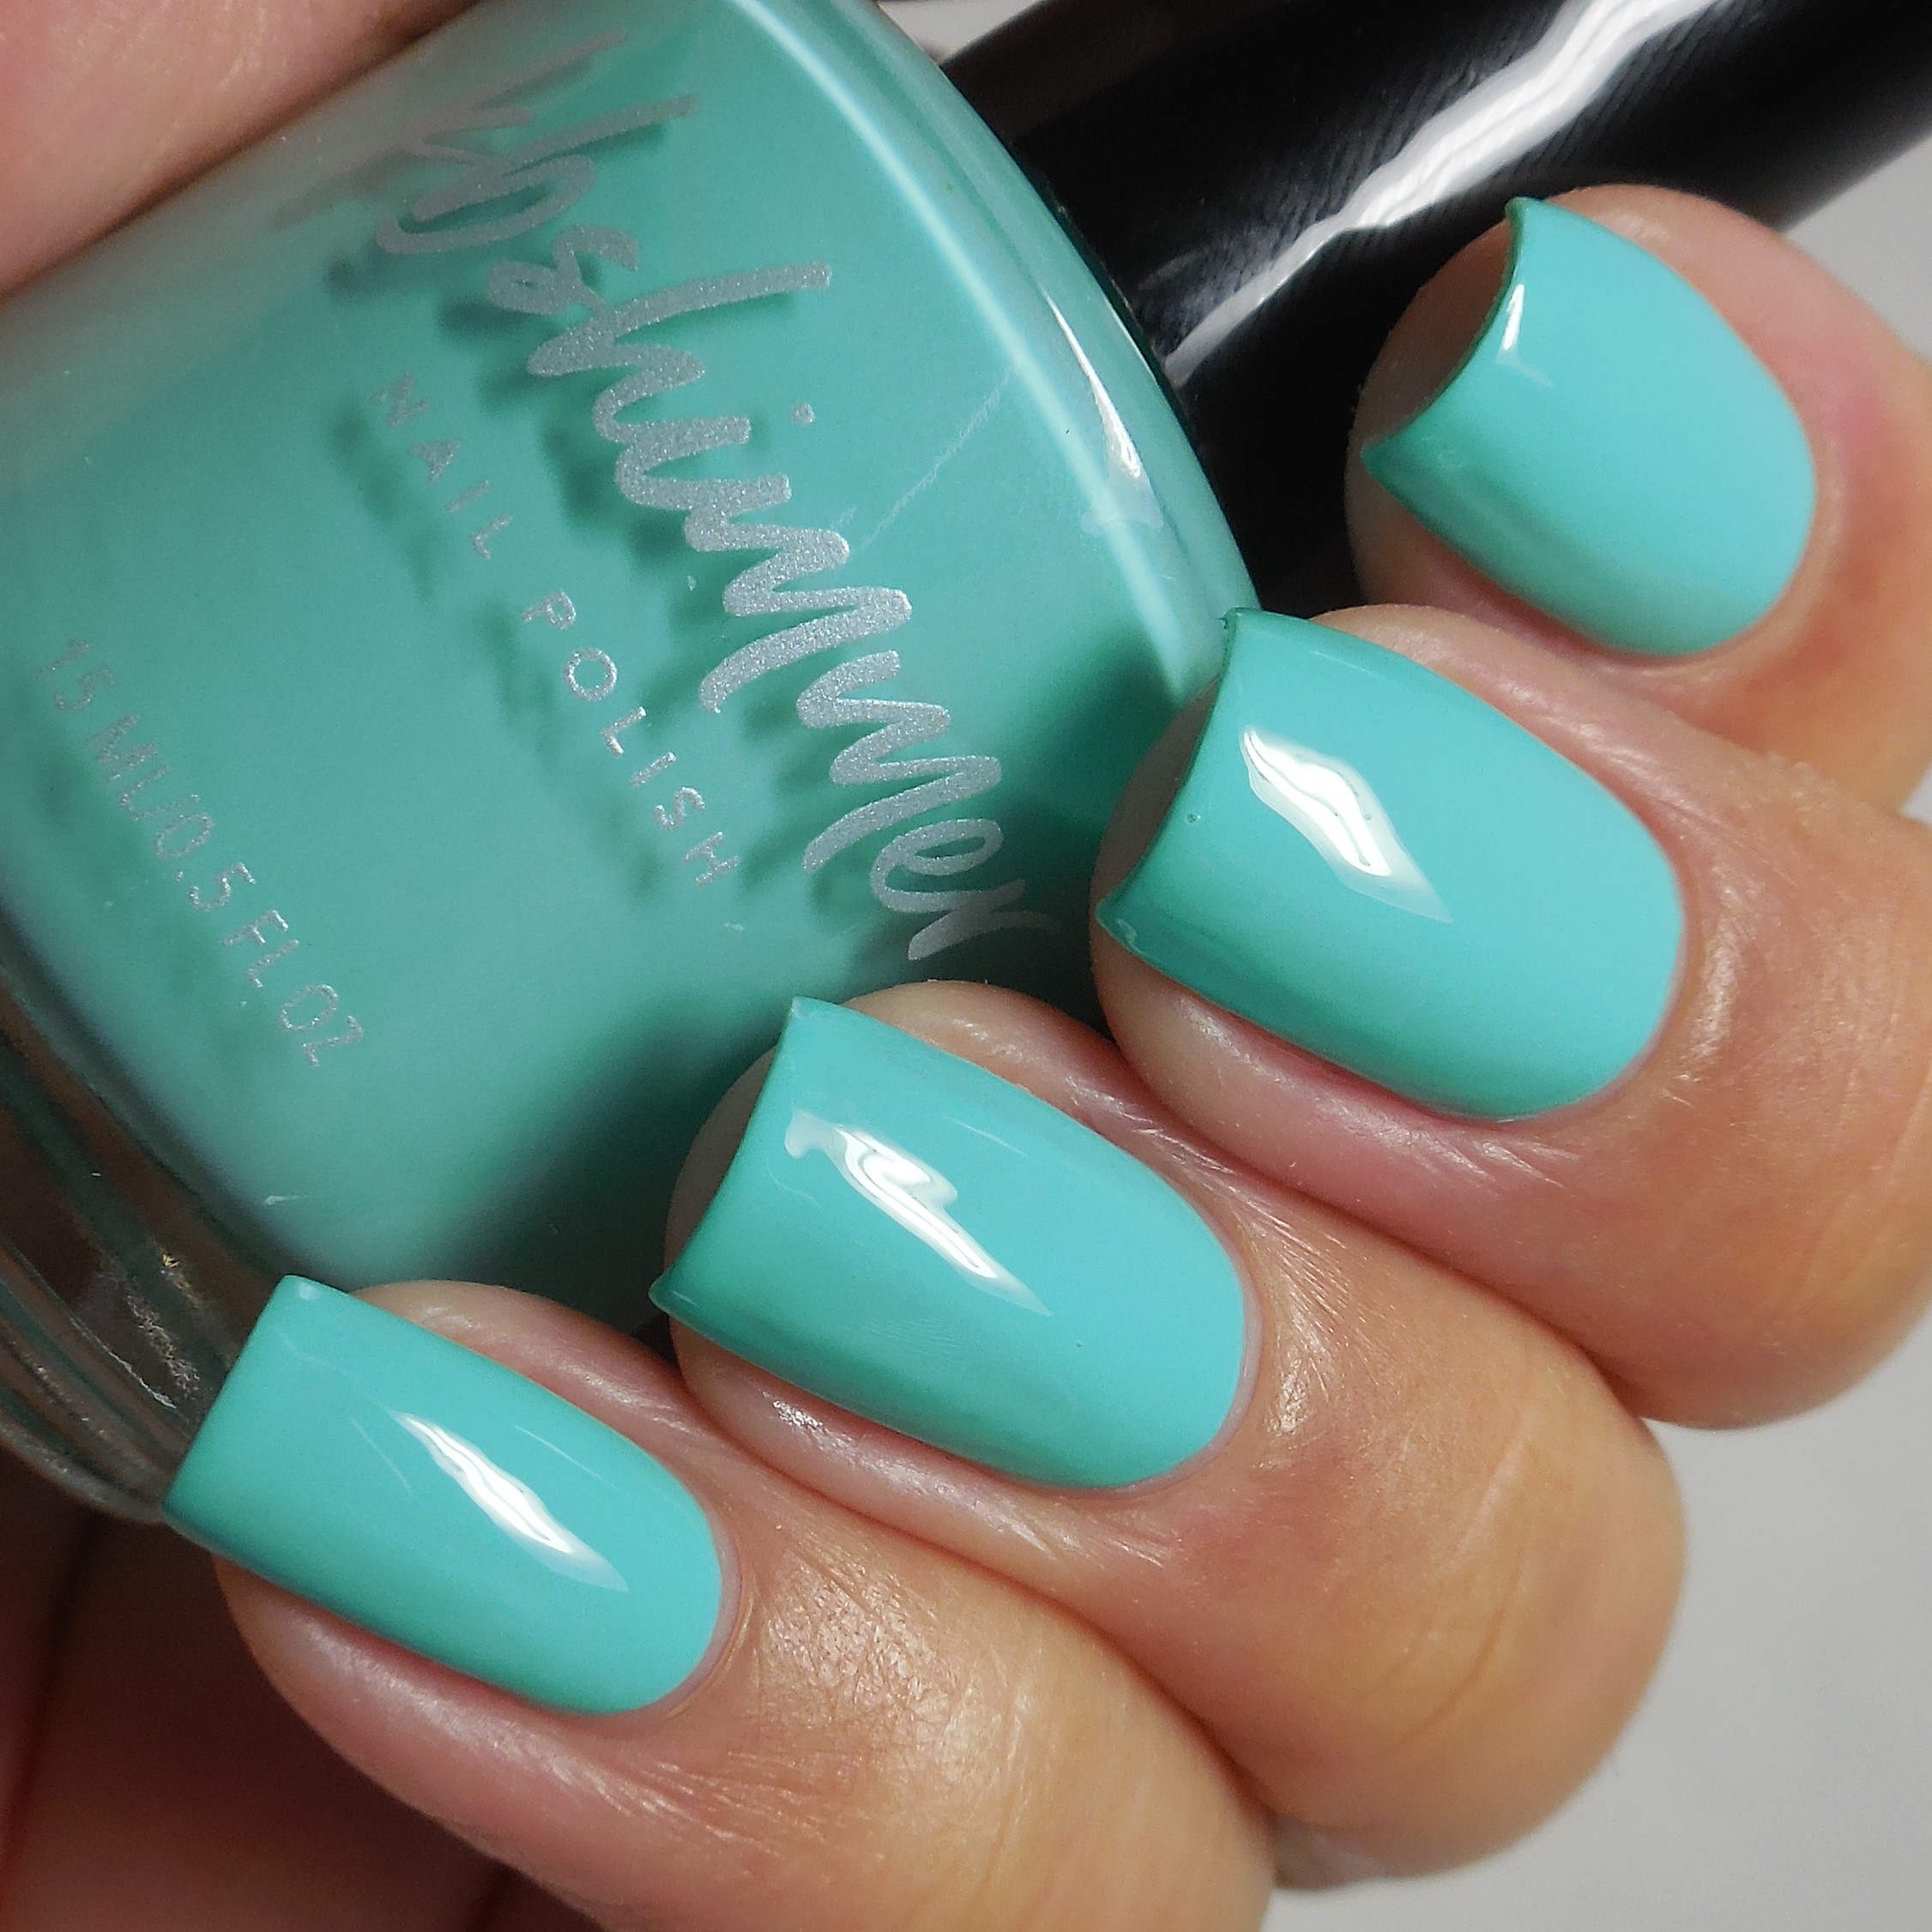 NuGenesis Nails - NU-02 Robin's Egg Blue is a perfect soft teal.  @luxury_nails_and_makeup . . . . . #nugenesisnails #nugenesis  #dippowdernails #dipnails #dippowder #nailfashion #nailart #nailstyle  #style #fashion #greennails #gogreen #naillove ...